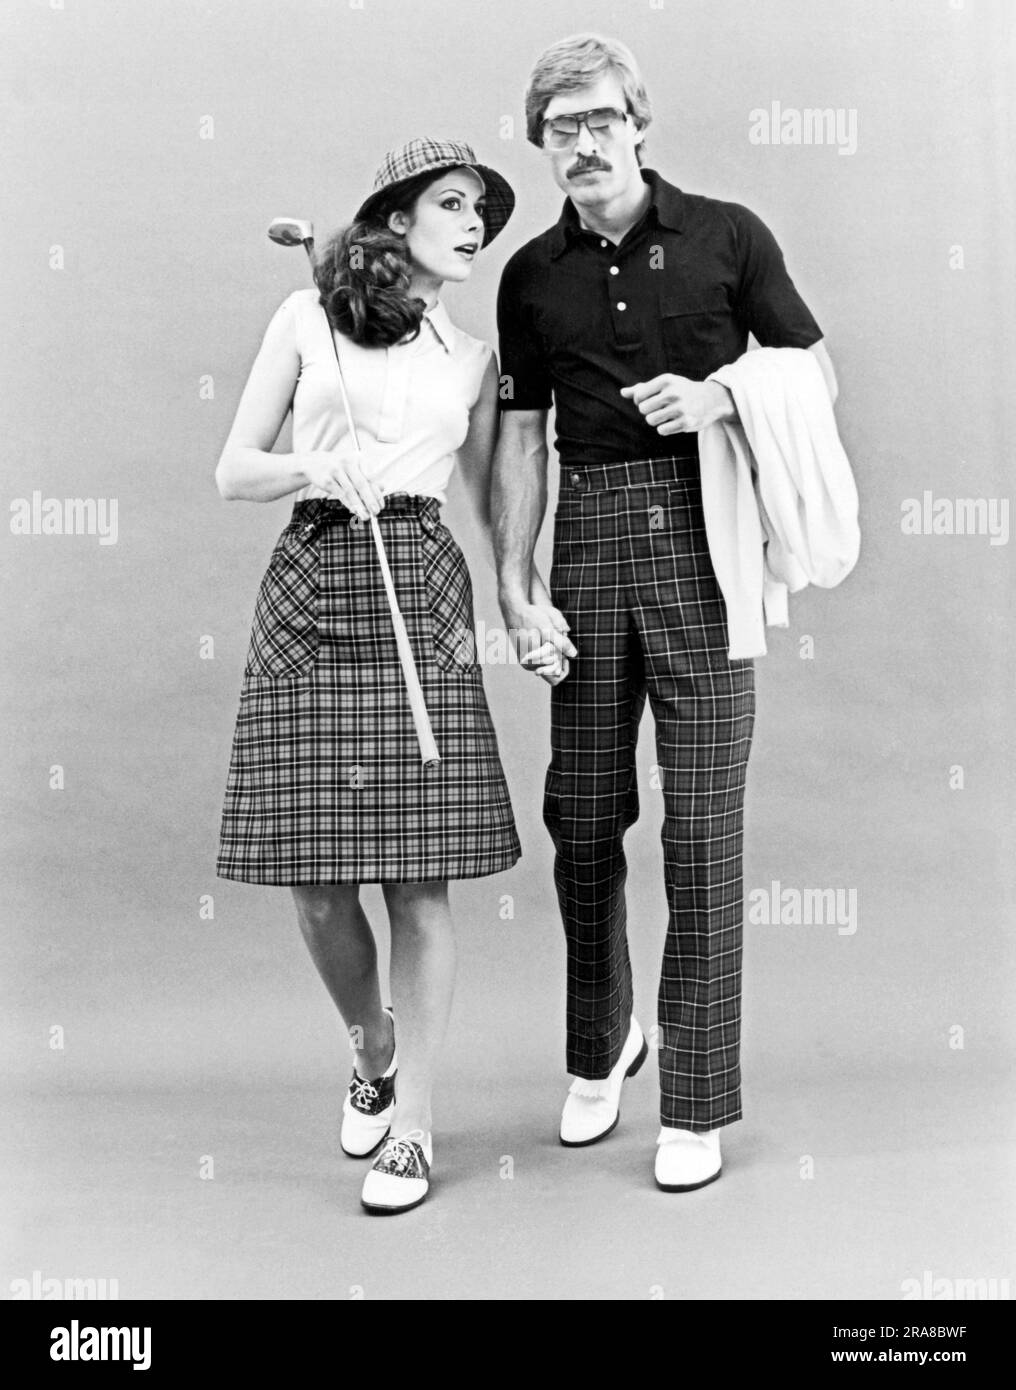 United States:  c. 1962 A stylish couple in checkered golf attire holding hands. She's wearing saddle shoes and he has white tasseled loafers. Stock Photo